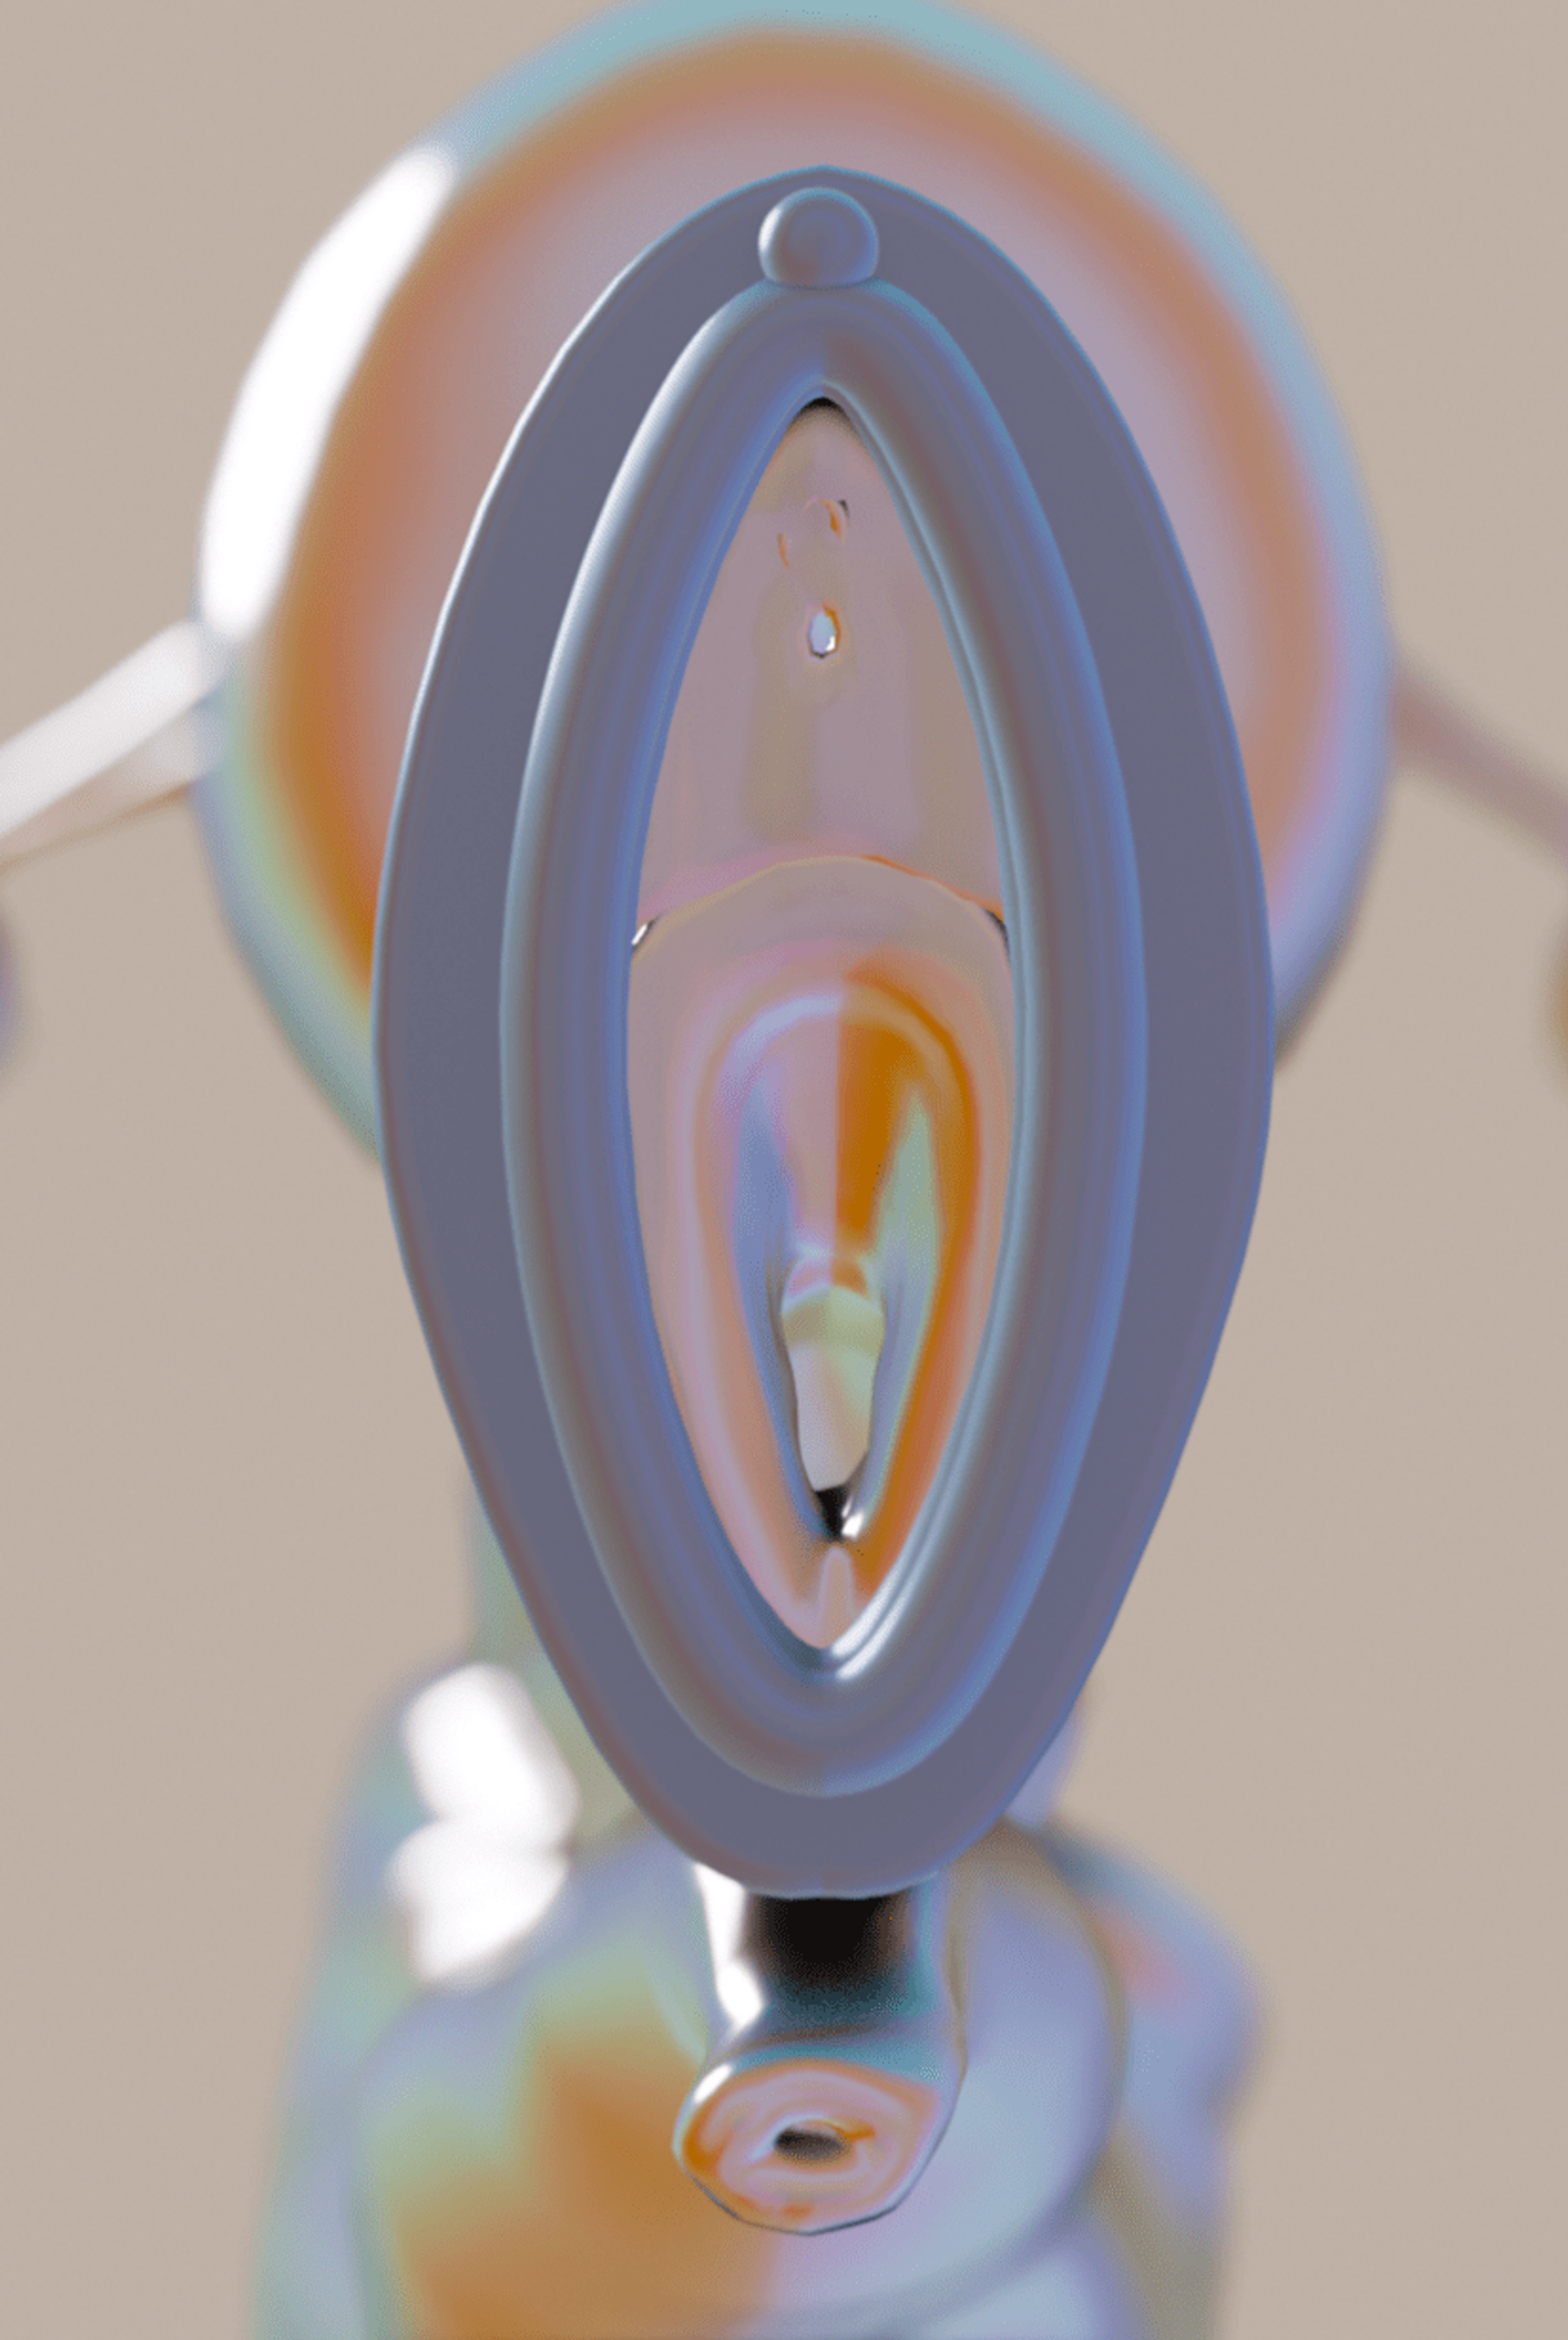 Image of an unknown object in close-up, with a metallic elliptical shape, with a circular shape out of focus, behind it. By Georgia Mackenzie